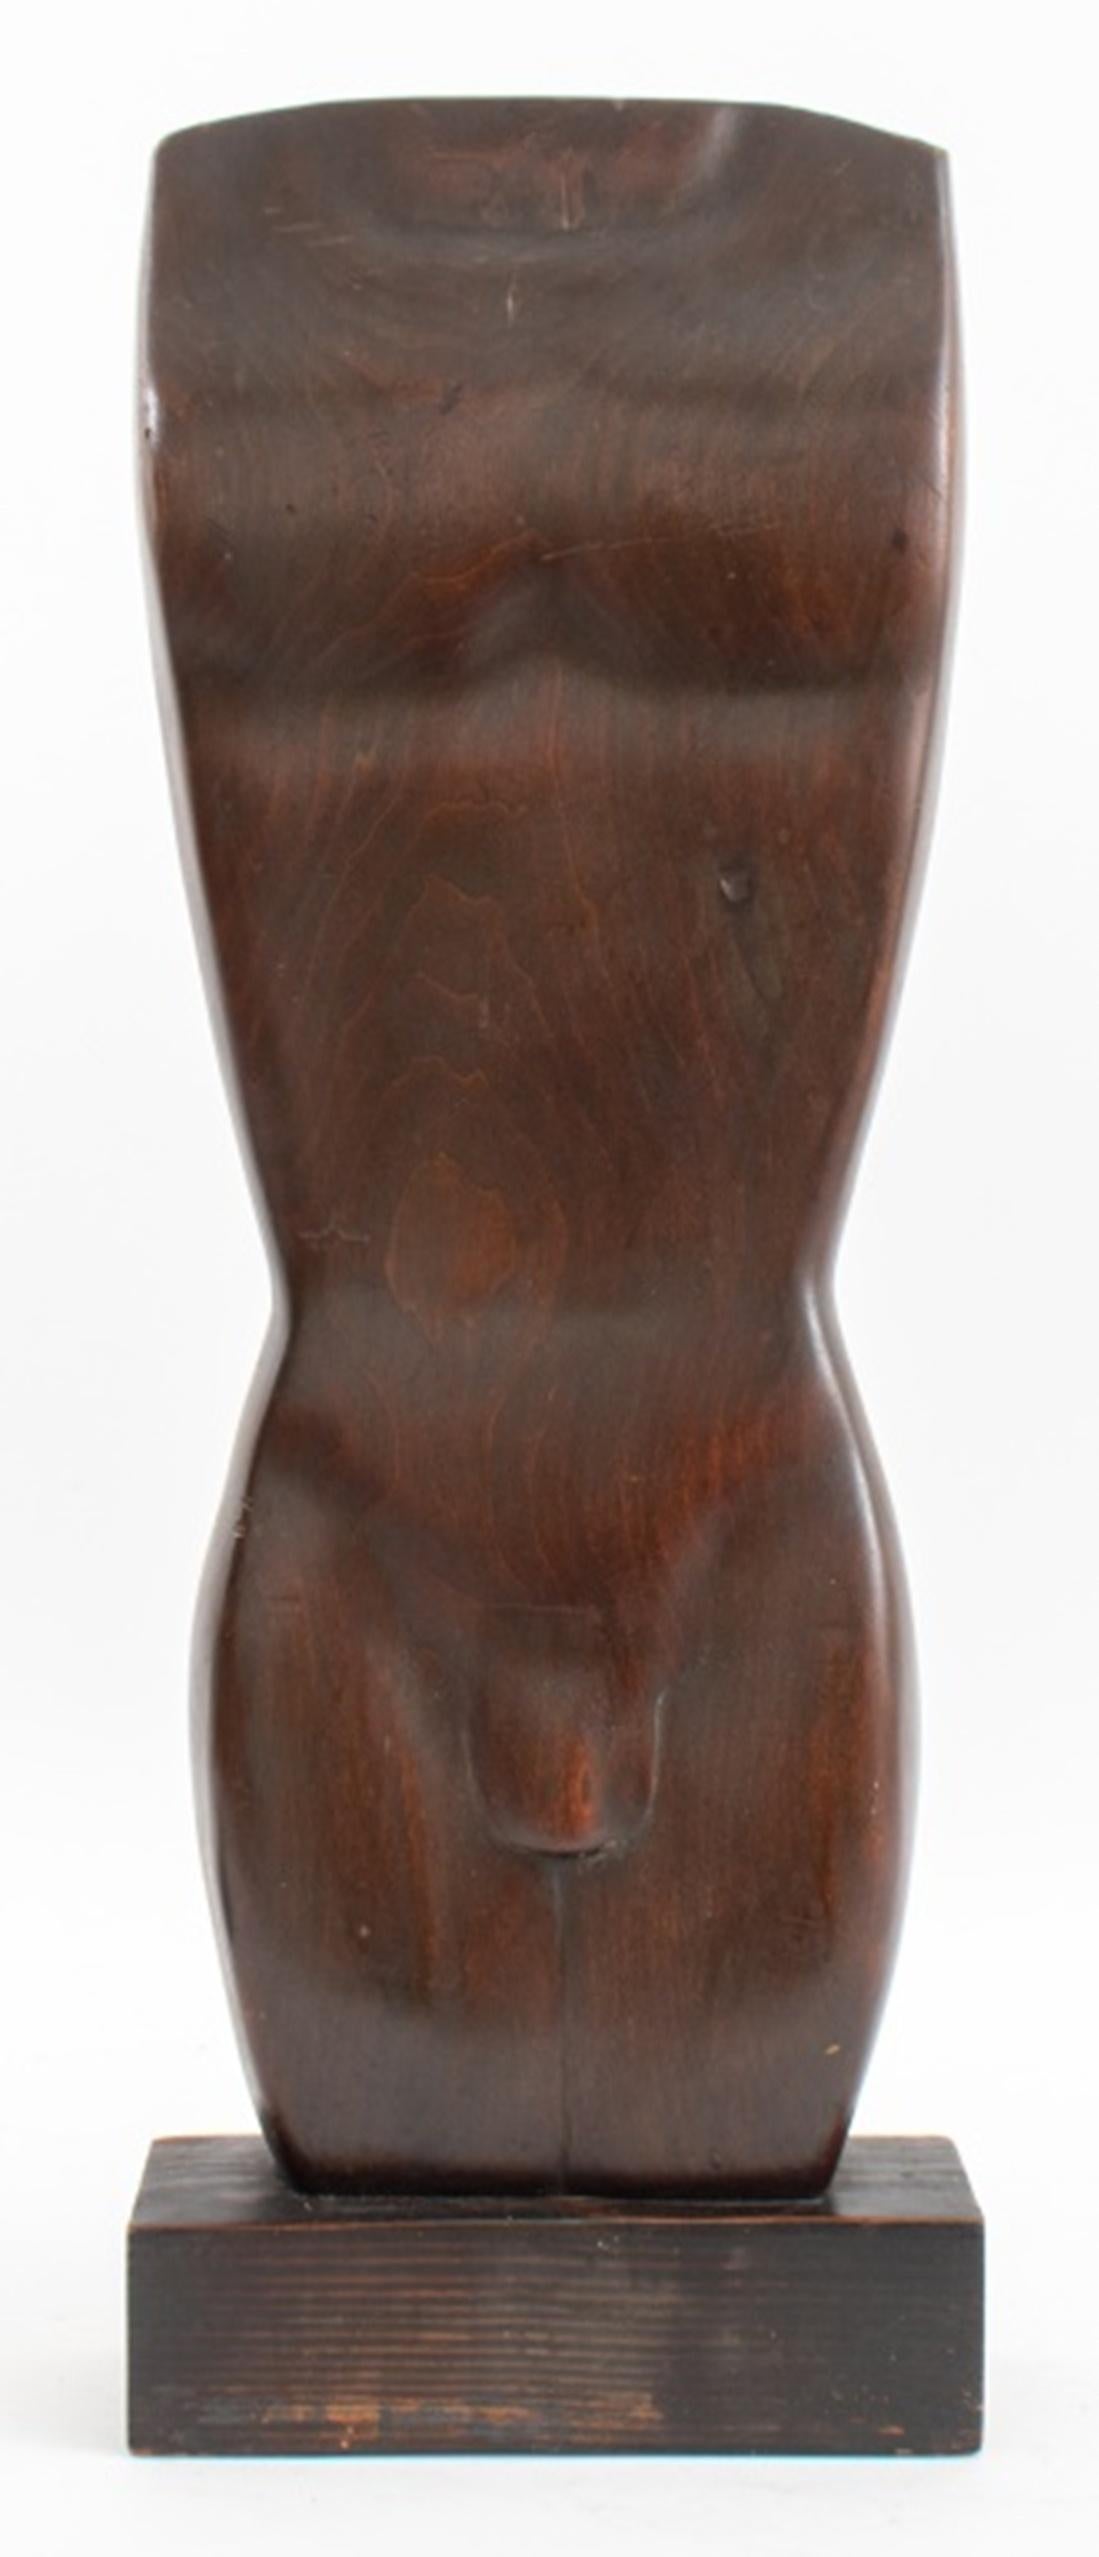 Modernist sculpture of a nude man, initialed F.L., stained hardwood.

Dimensions: 25